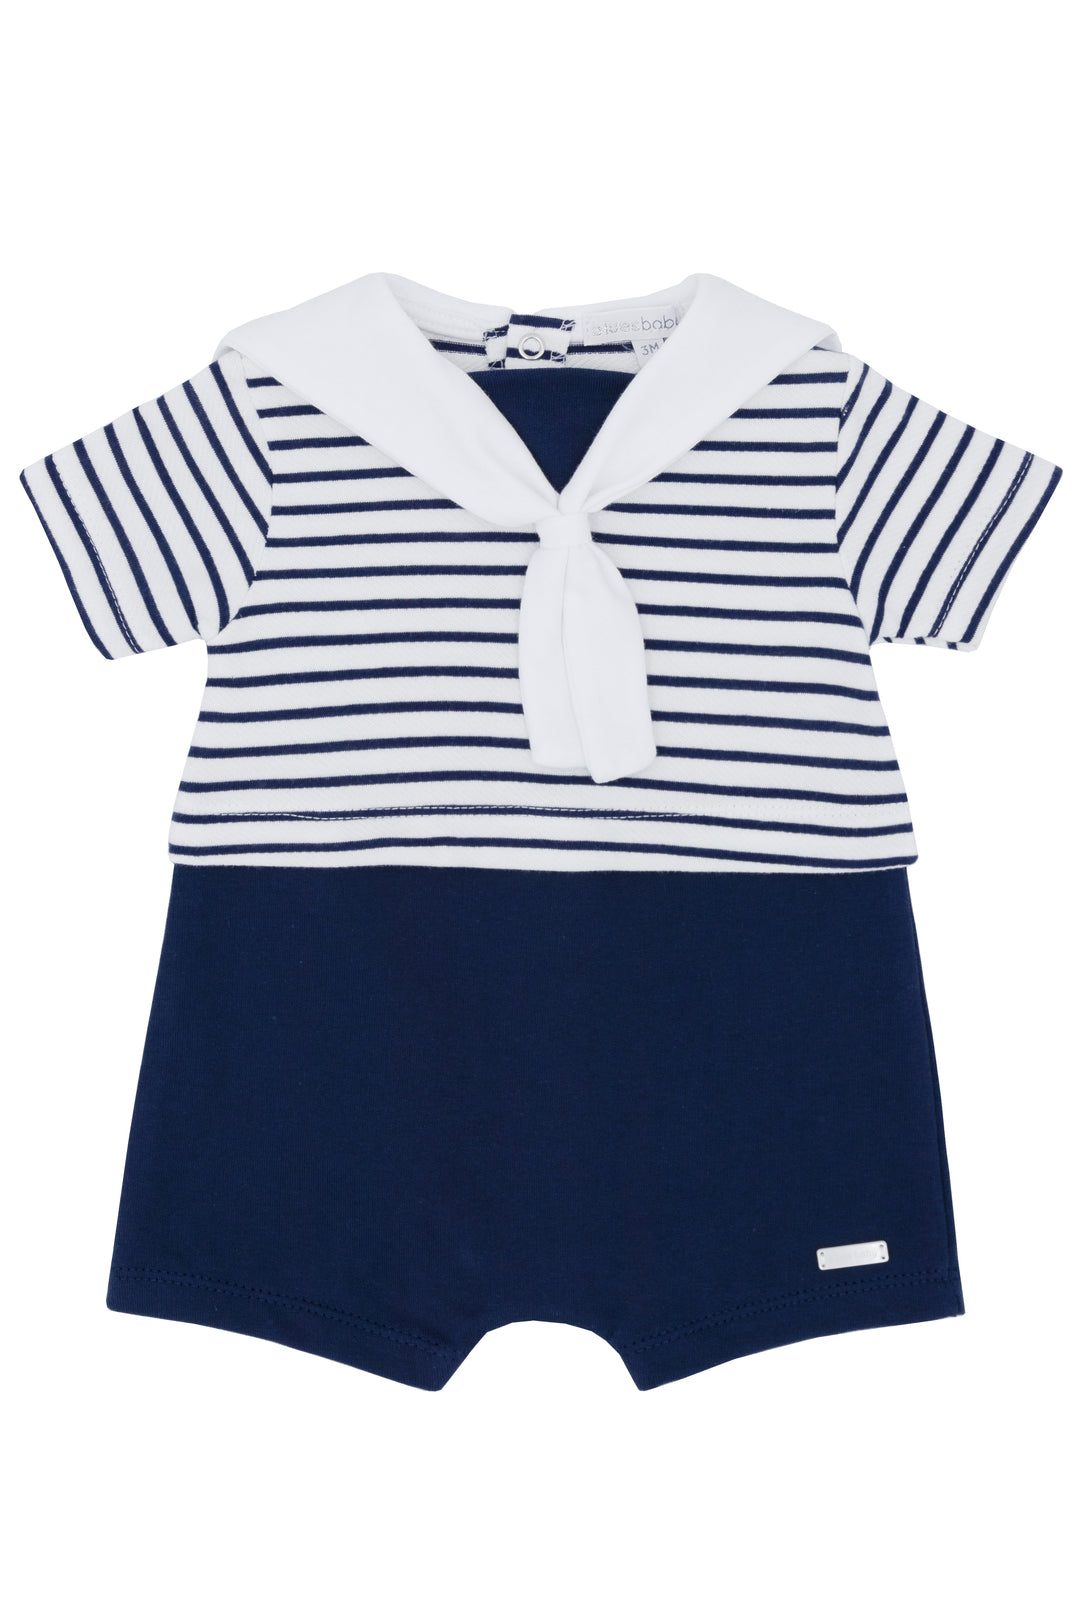 Blues Baby PREORDER "Caspian" Navy Striped Sailor Romper | Millie and John